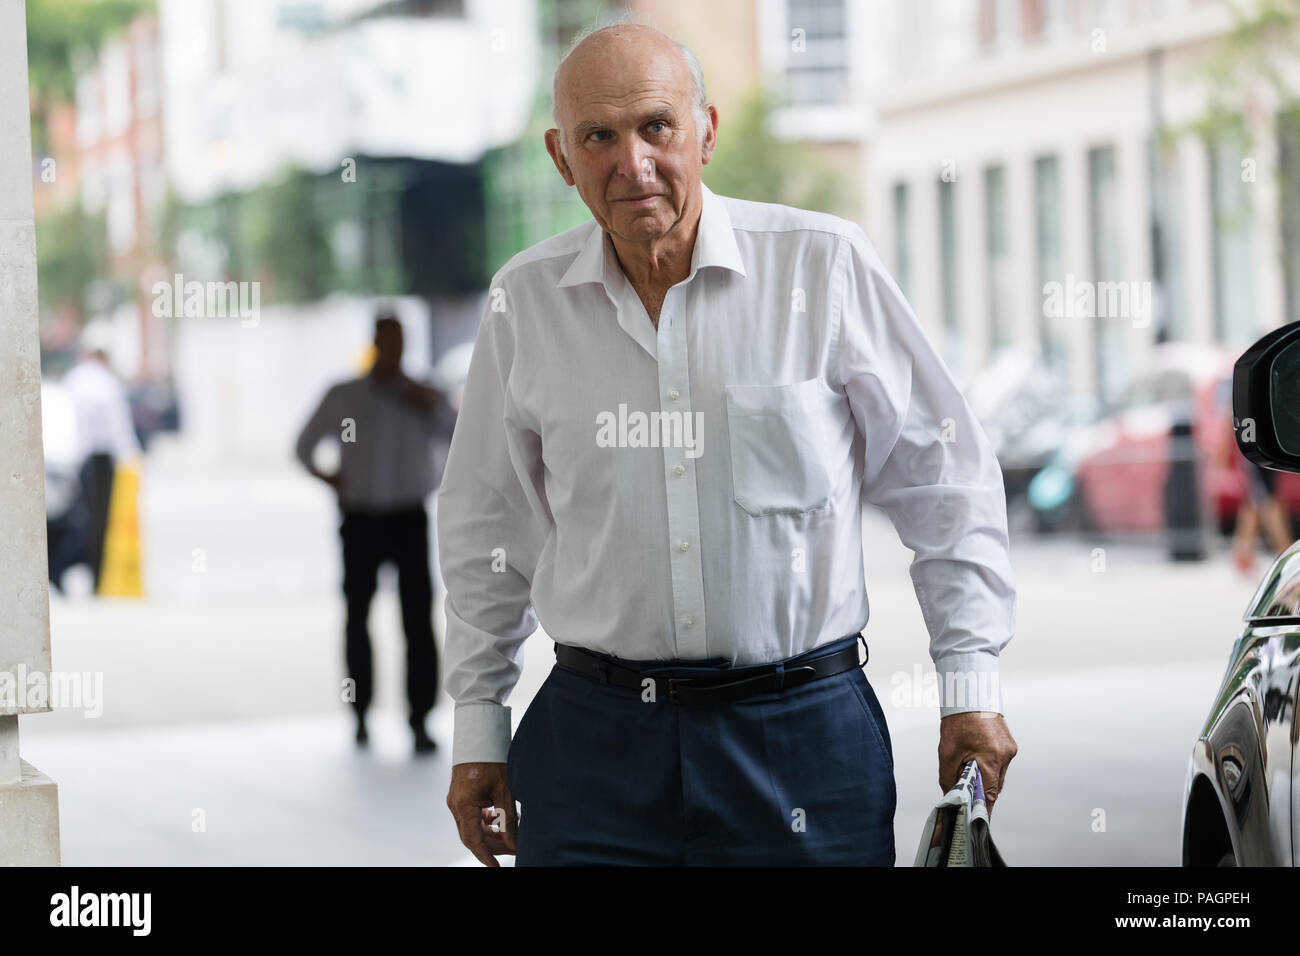 London, UK. 22nd July 2018. Vince Cable, leader of the Liberal Democrats party arrives at BBC Broadcasting House in London. Stock Photo